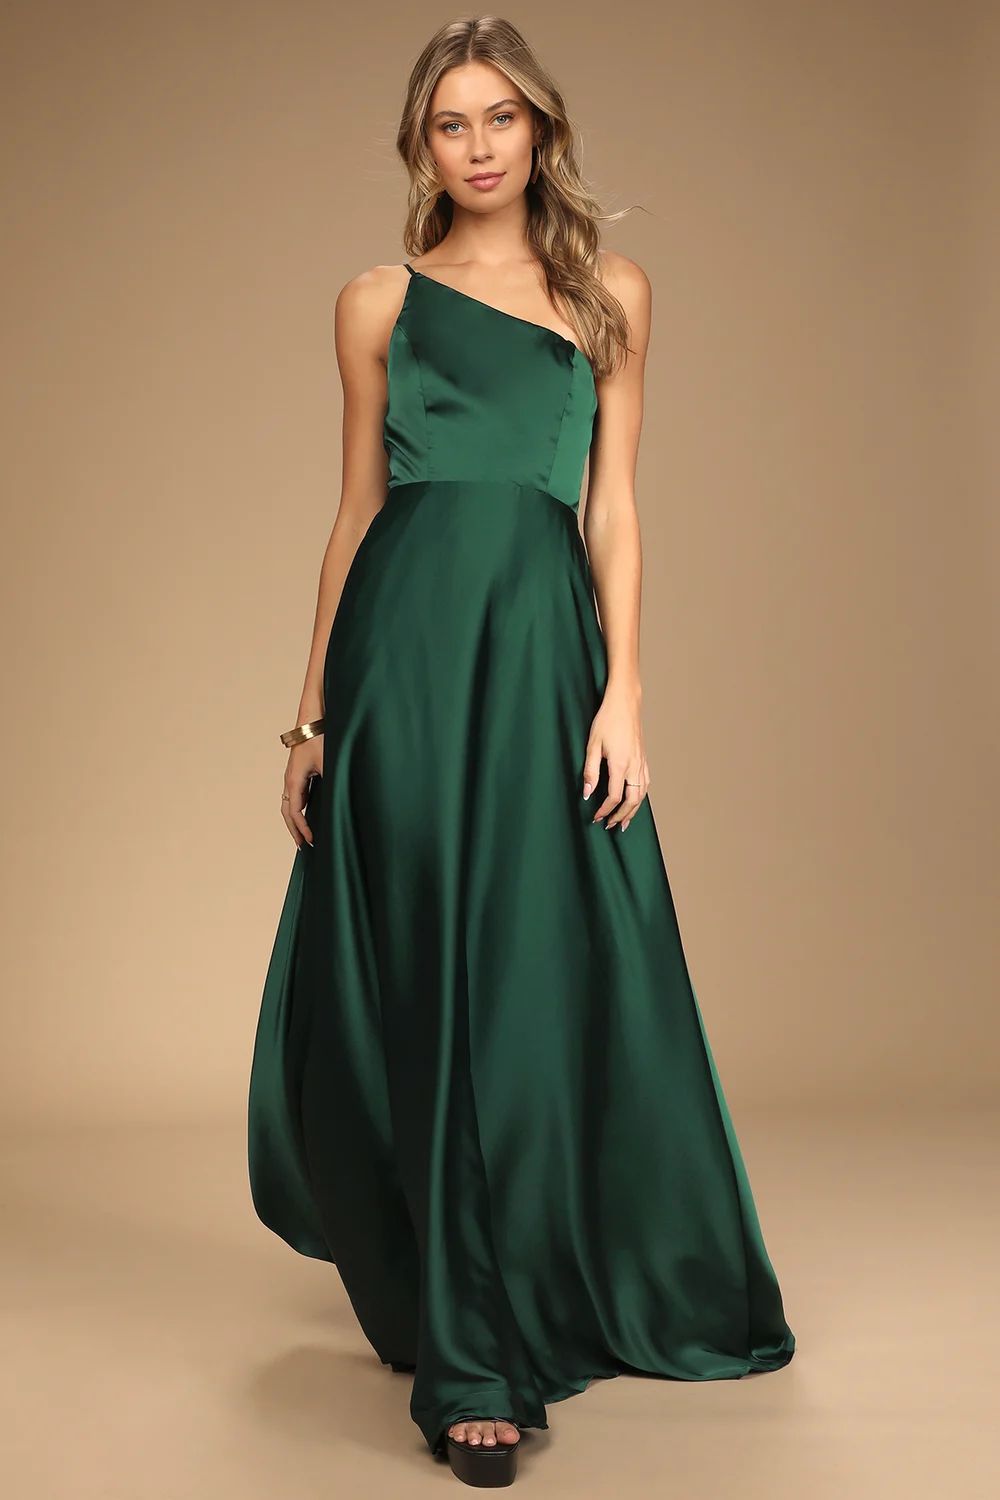 Love's Calling Green Satin One-Shoulder Maxi Dress With Pockets | Lulus (US)